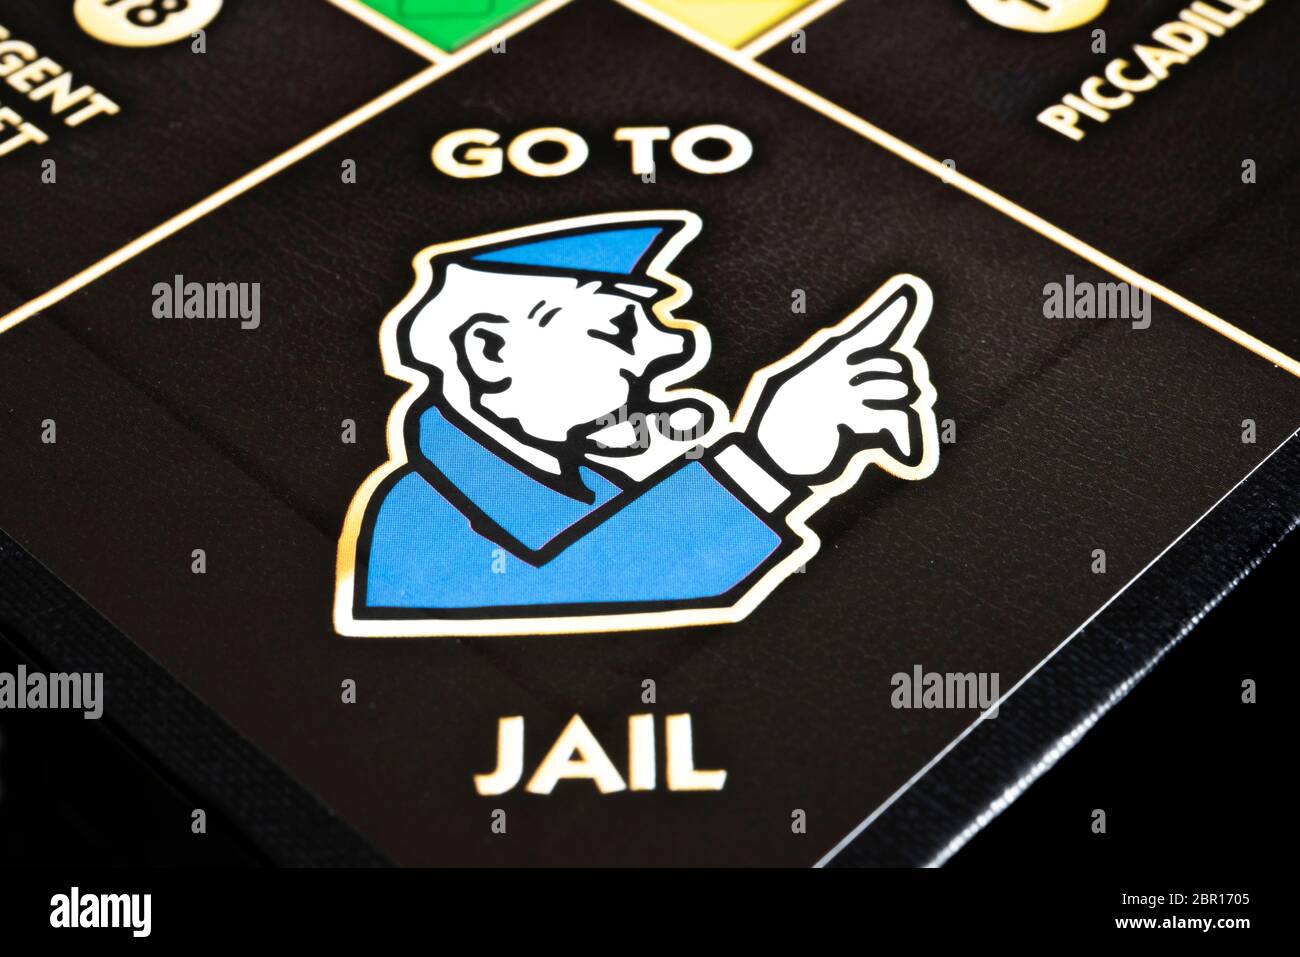 Monopoly go to jail policeman blowing whistle Stock Photo